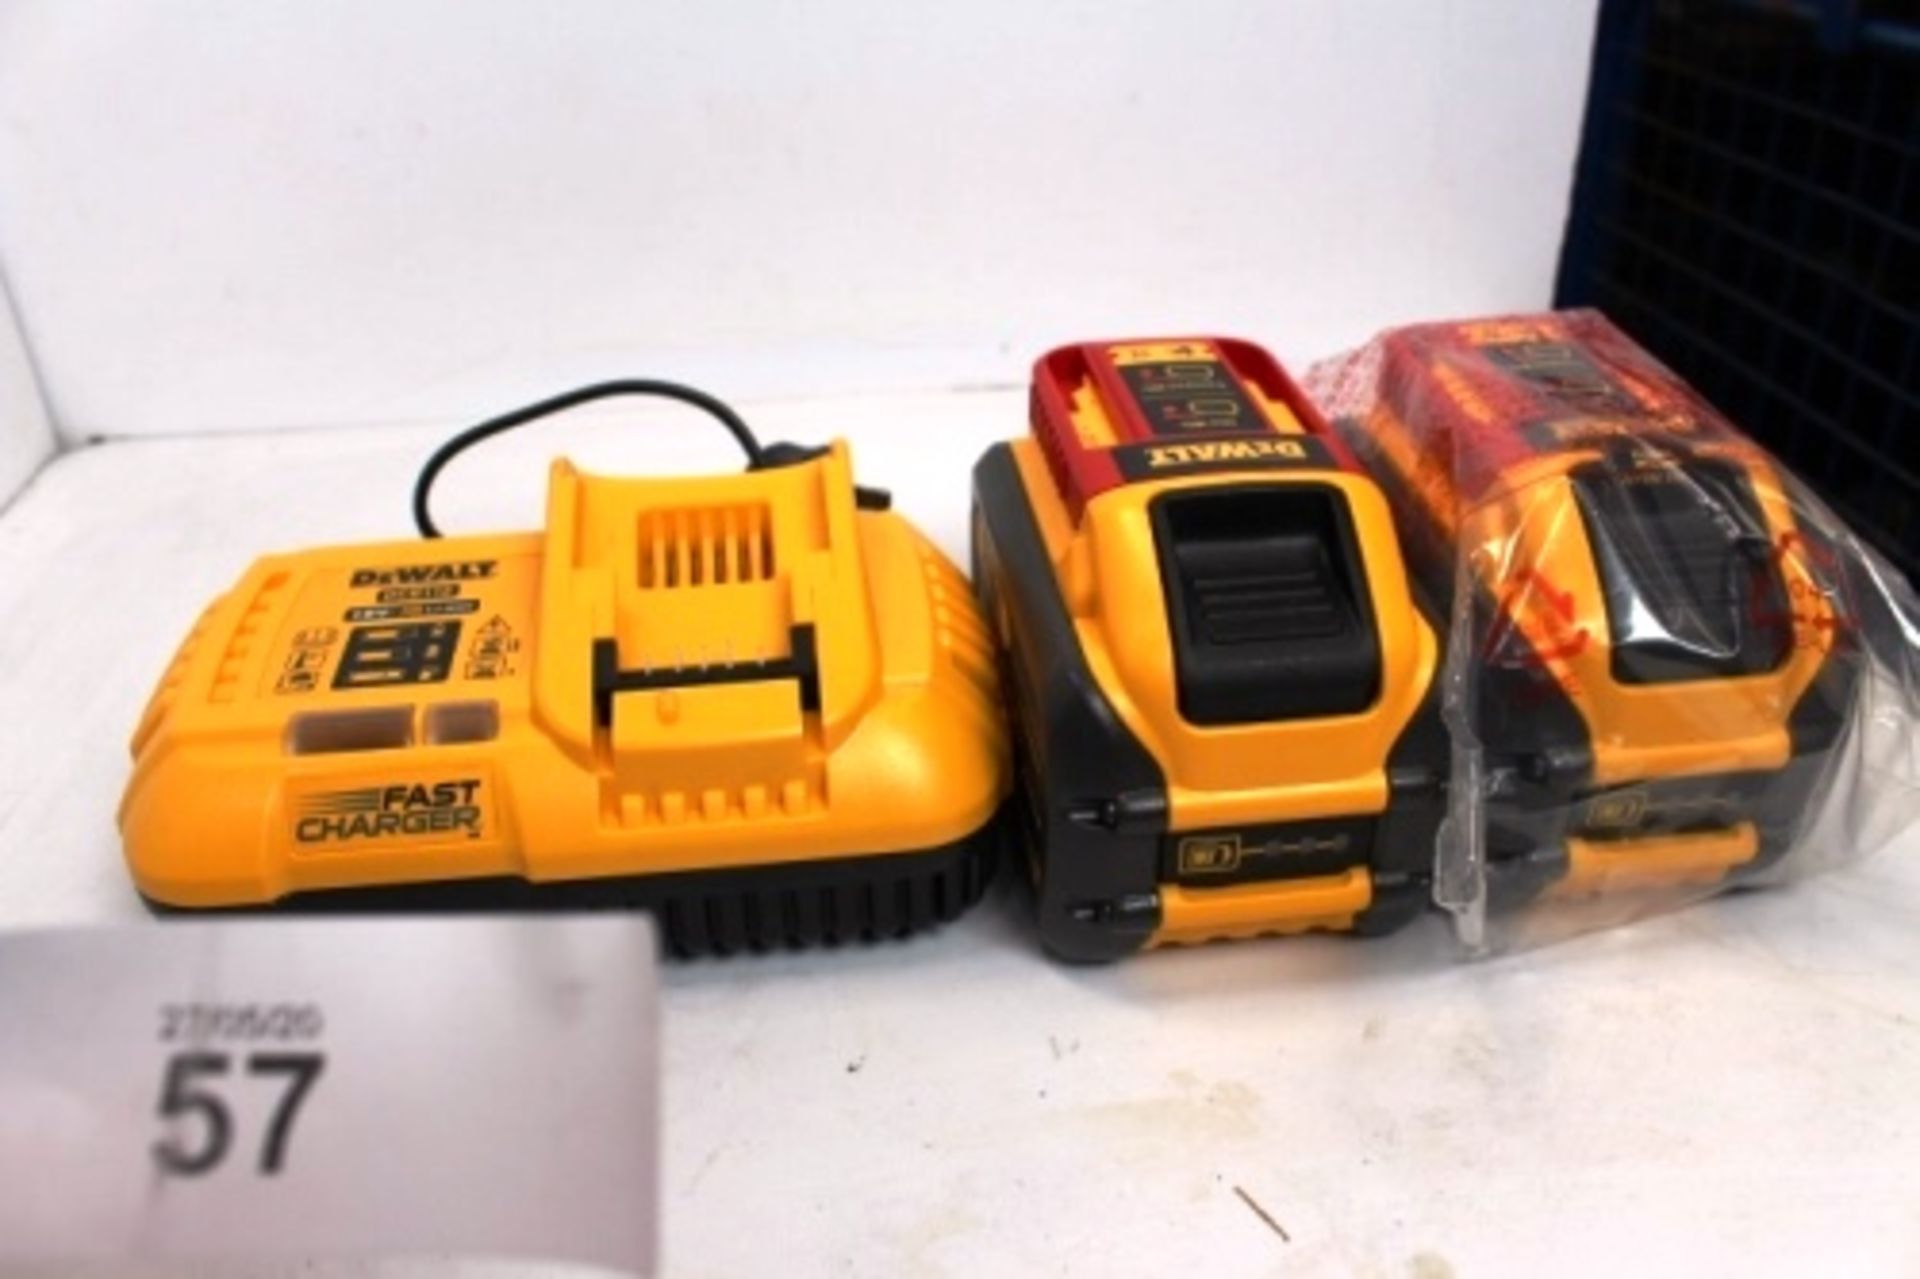 2 x DeWalt 18V, 9AH power tool batteries, together with DCB118 fast charger - New (TC6)